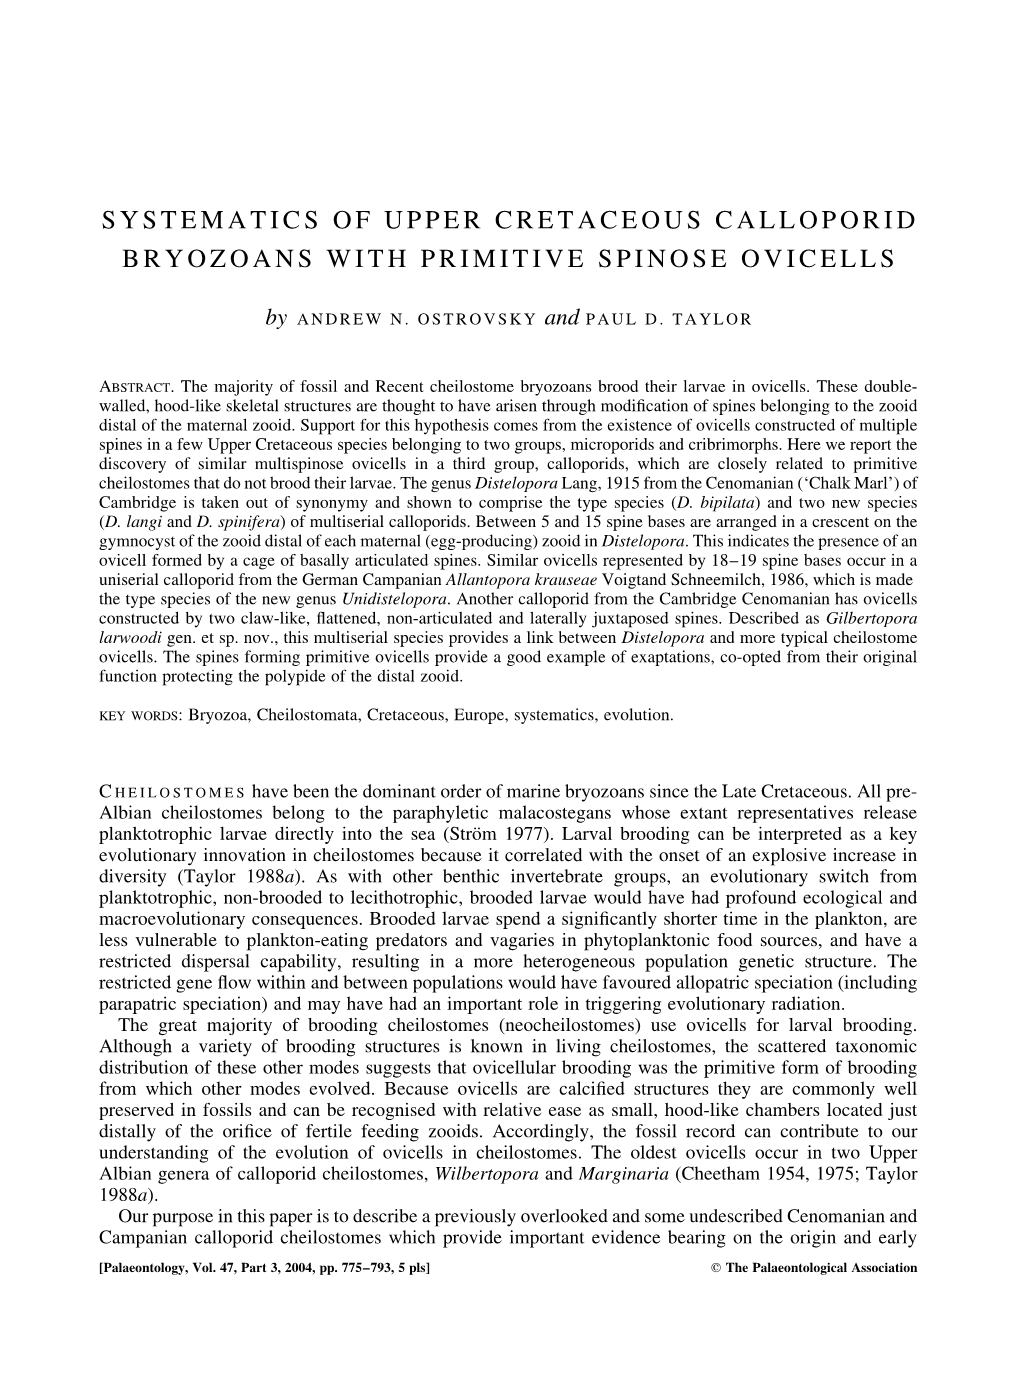 Systematics of Upper Cretaceous Calloporid Bryozoans with Primitive Spinose Ovicells